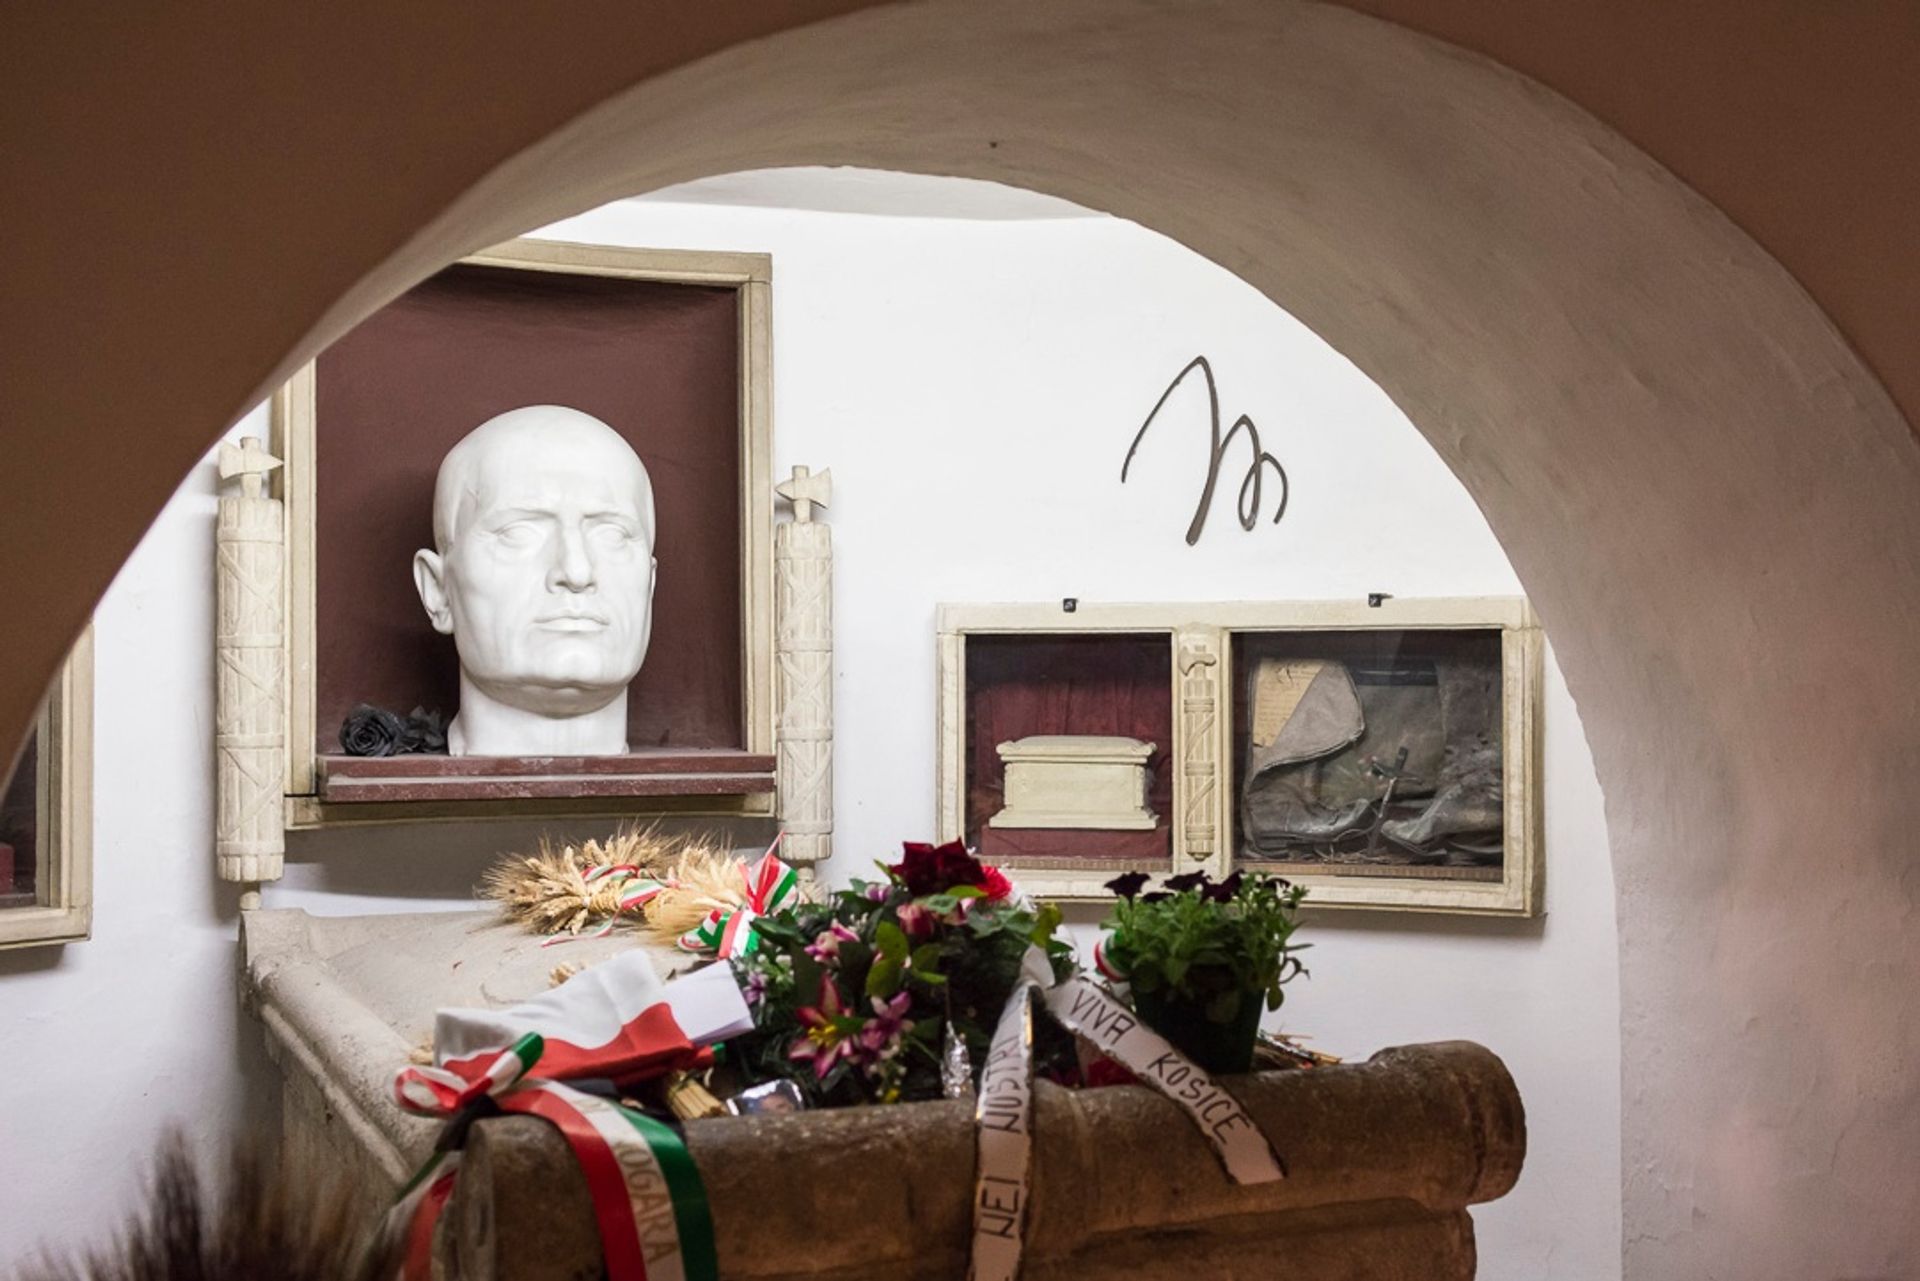 The crypt of Benito Mussolini has reopened to the public 